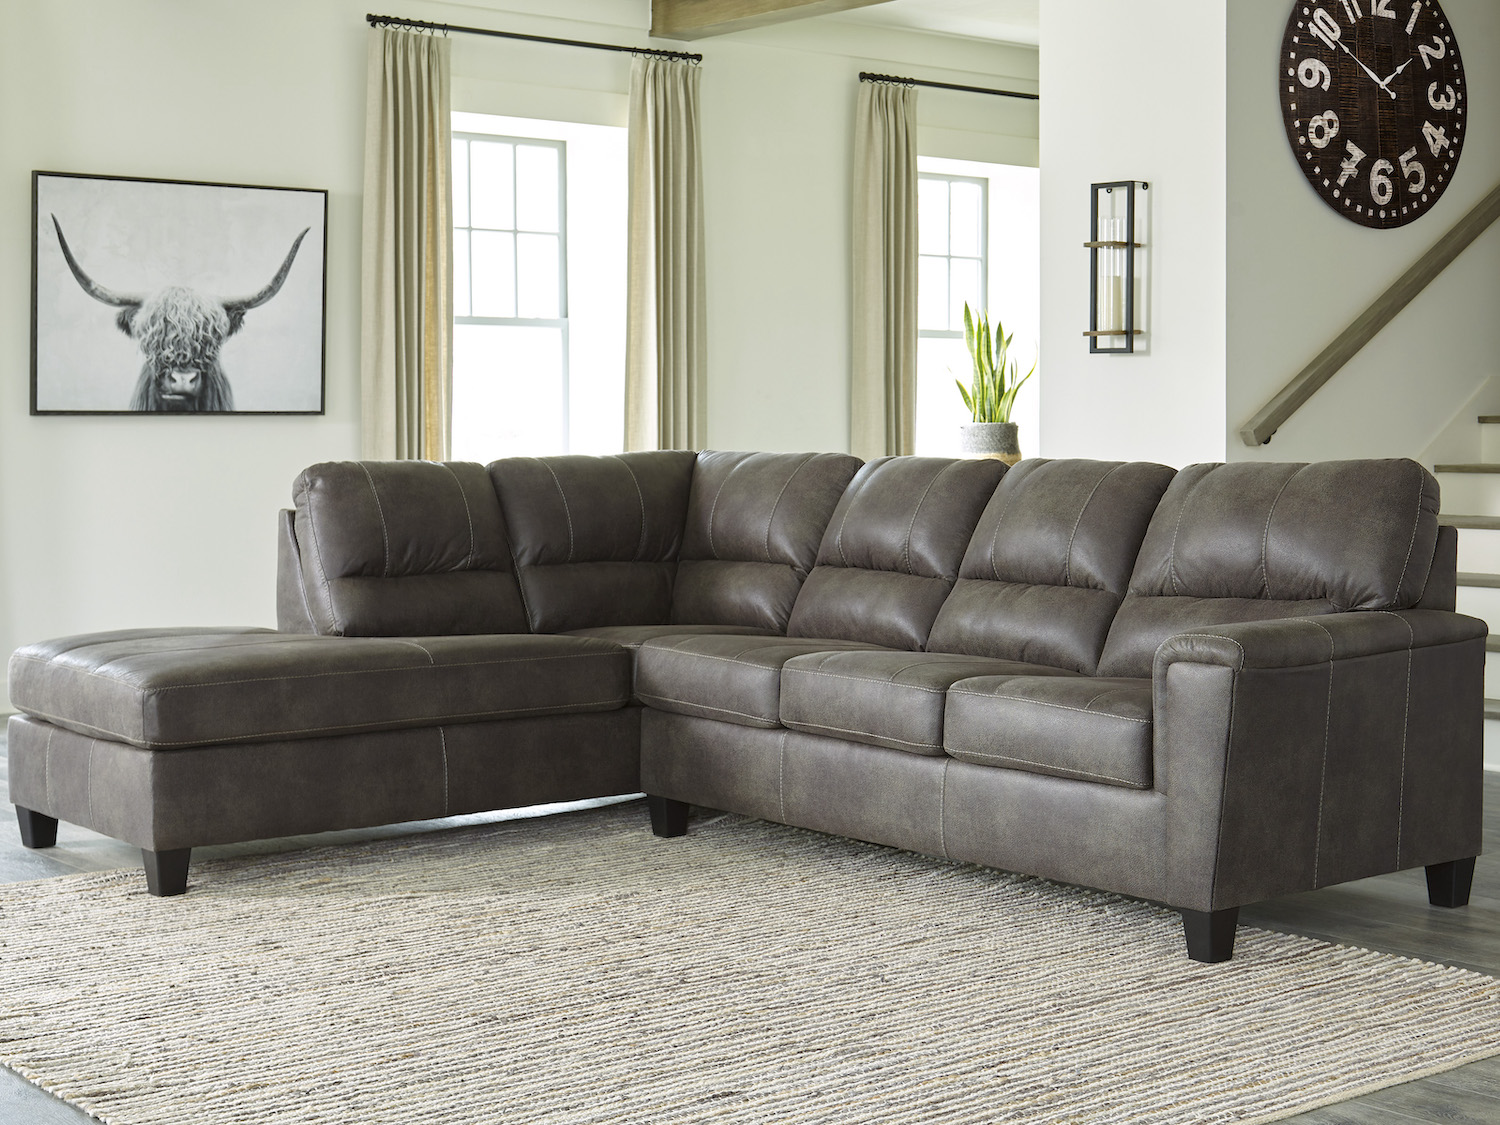 Ashley Navi Sectional Sofa Smoke, Leather Sectional With Chaise Ashley